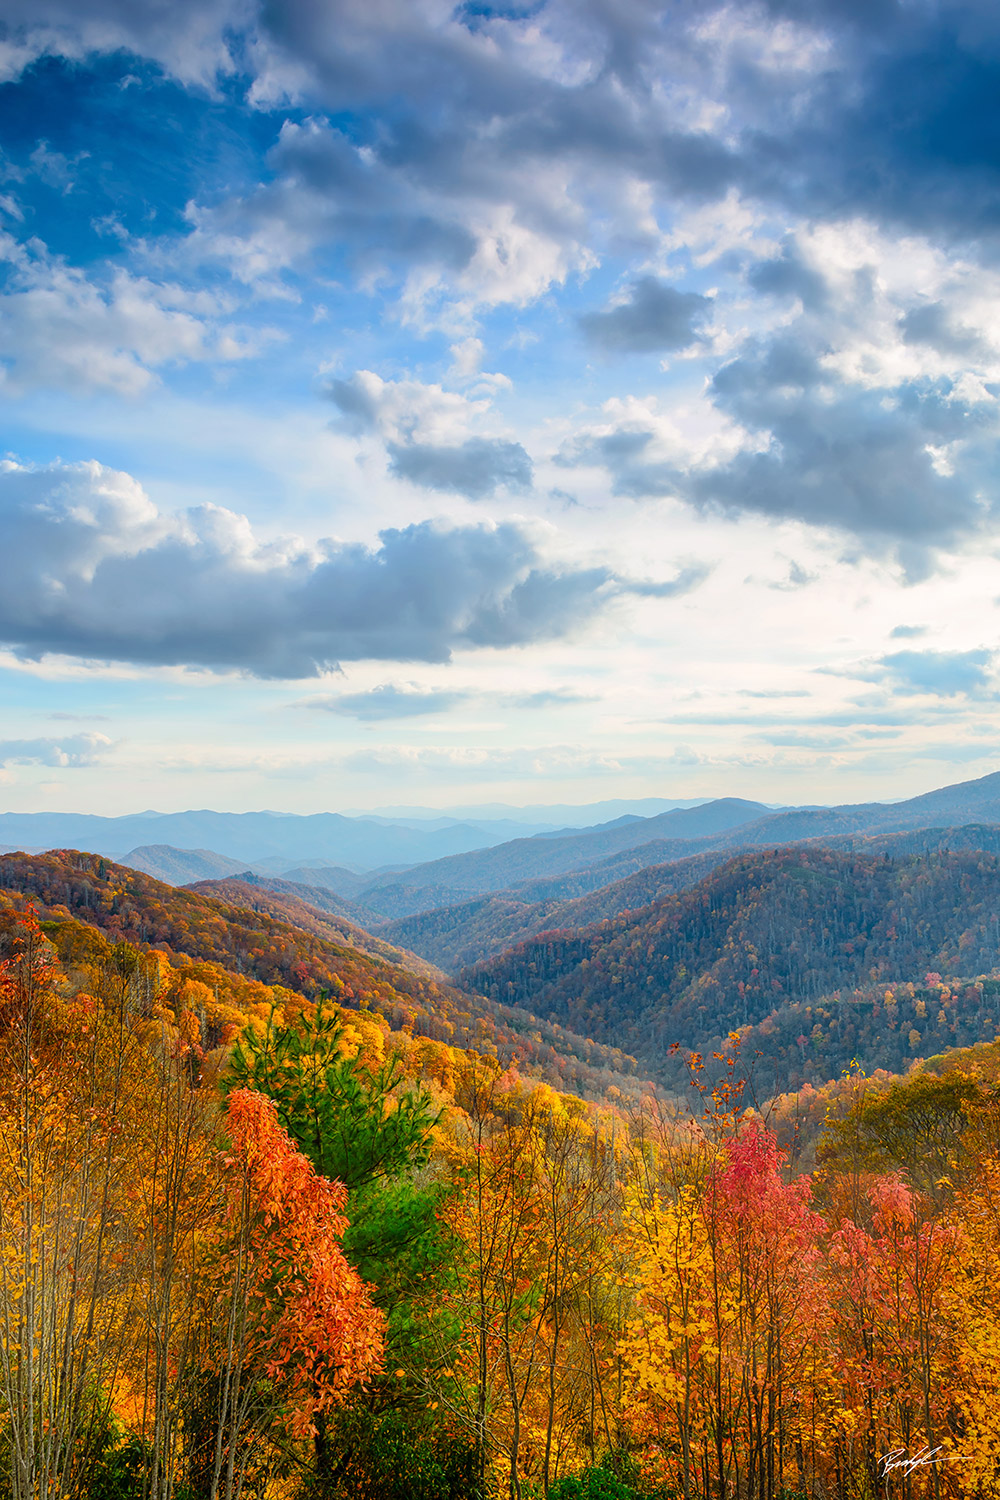 Autumn Ridges and Cloudy Sky, Smoky Mountain National Park, Tennessee